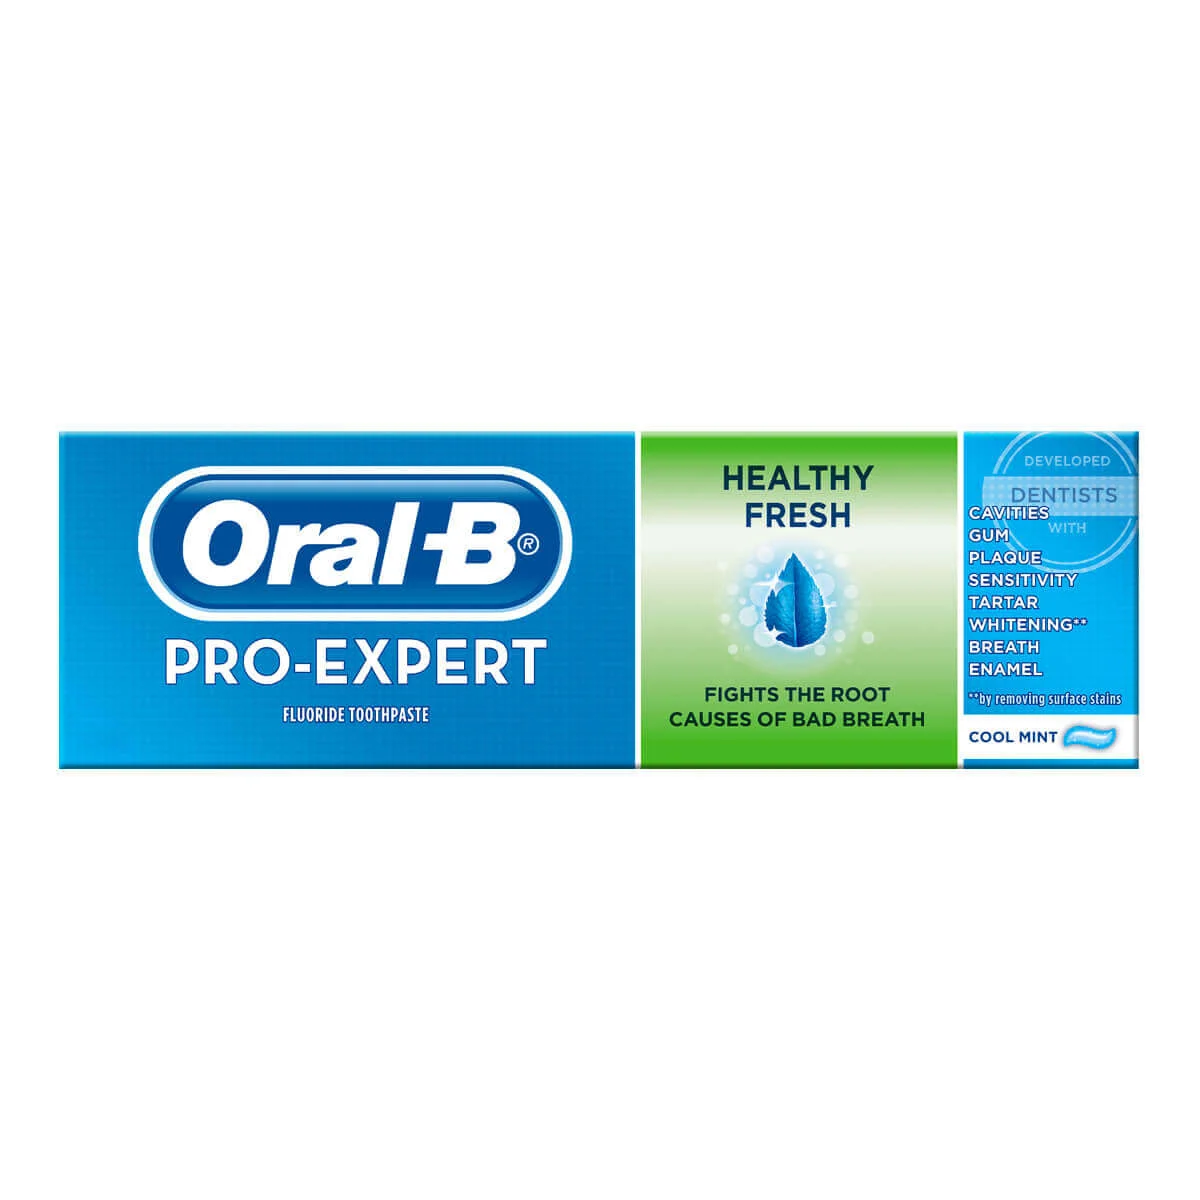 Oral-B Pro-Expert Healthy Fresh Toothpaste undefined